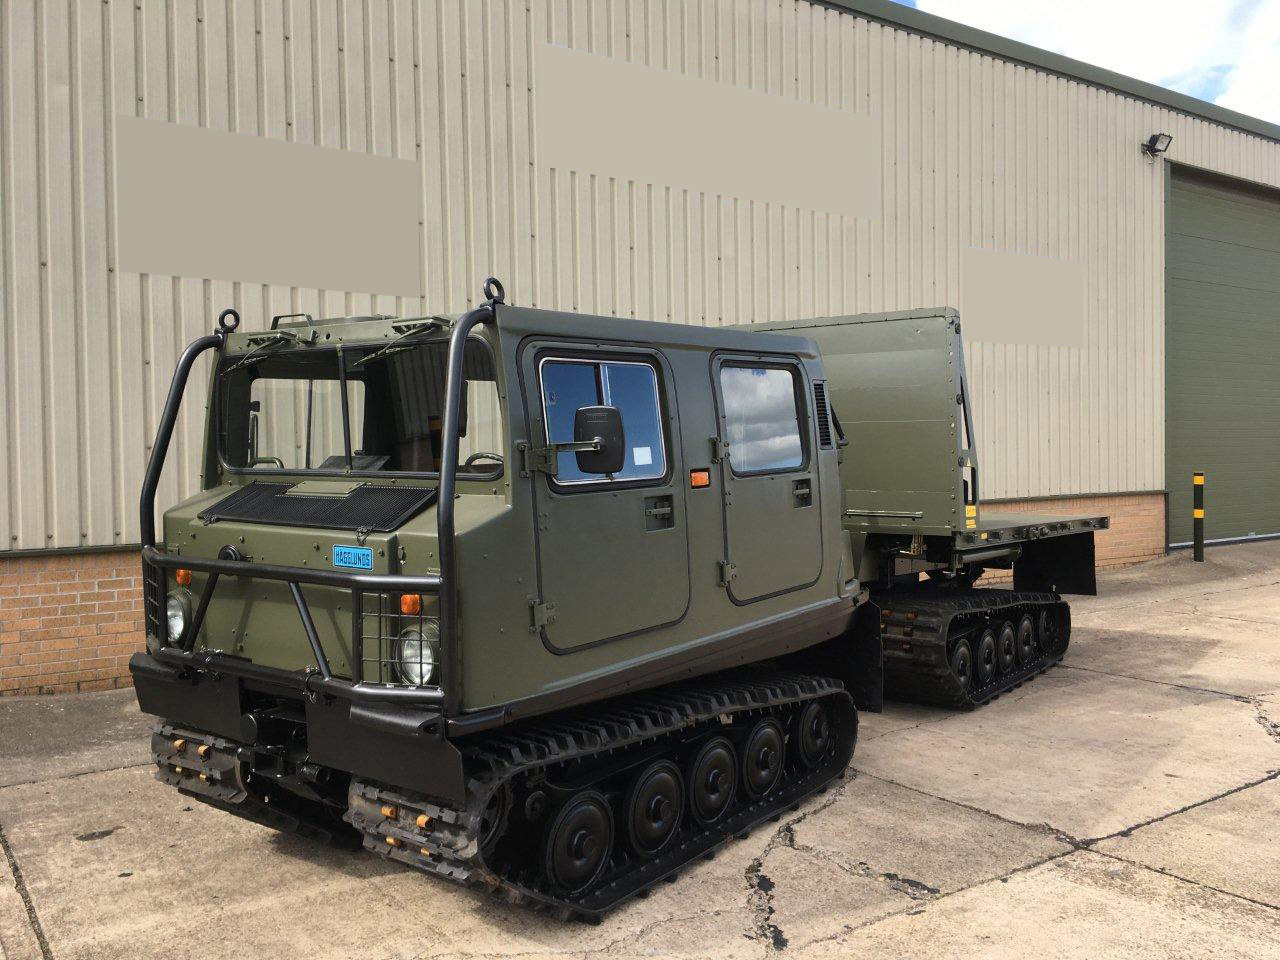 military vehicles for sale - <a href='/index.php/main-menu-stock/hagglund-bv206/models-available/50303-hagglunds-bv206-load-carrier-with-crane' title='Read more...' class='joodb_titletink'>Hagglunds Bv206 Load Carrier with Crane</a>